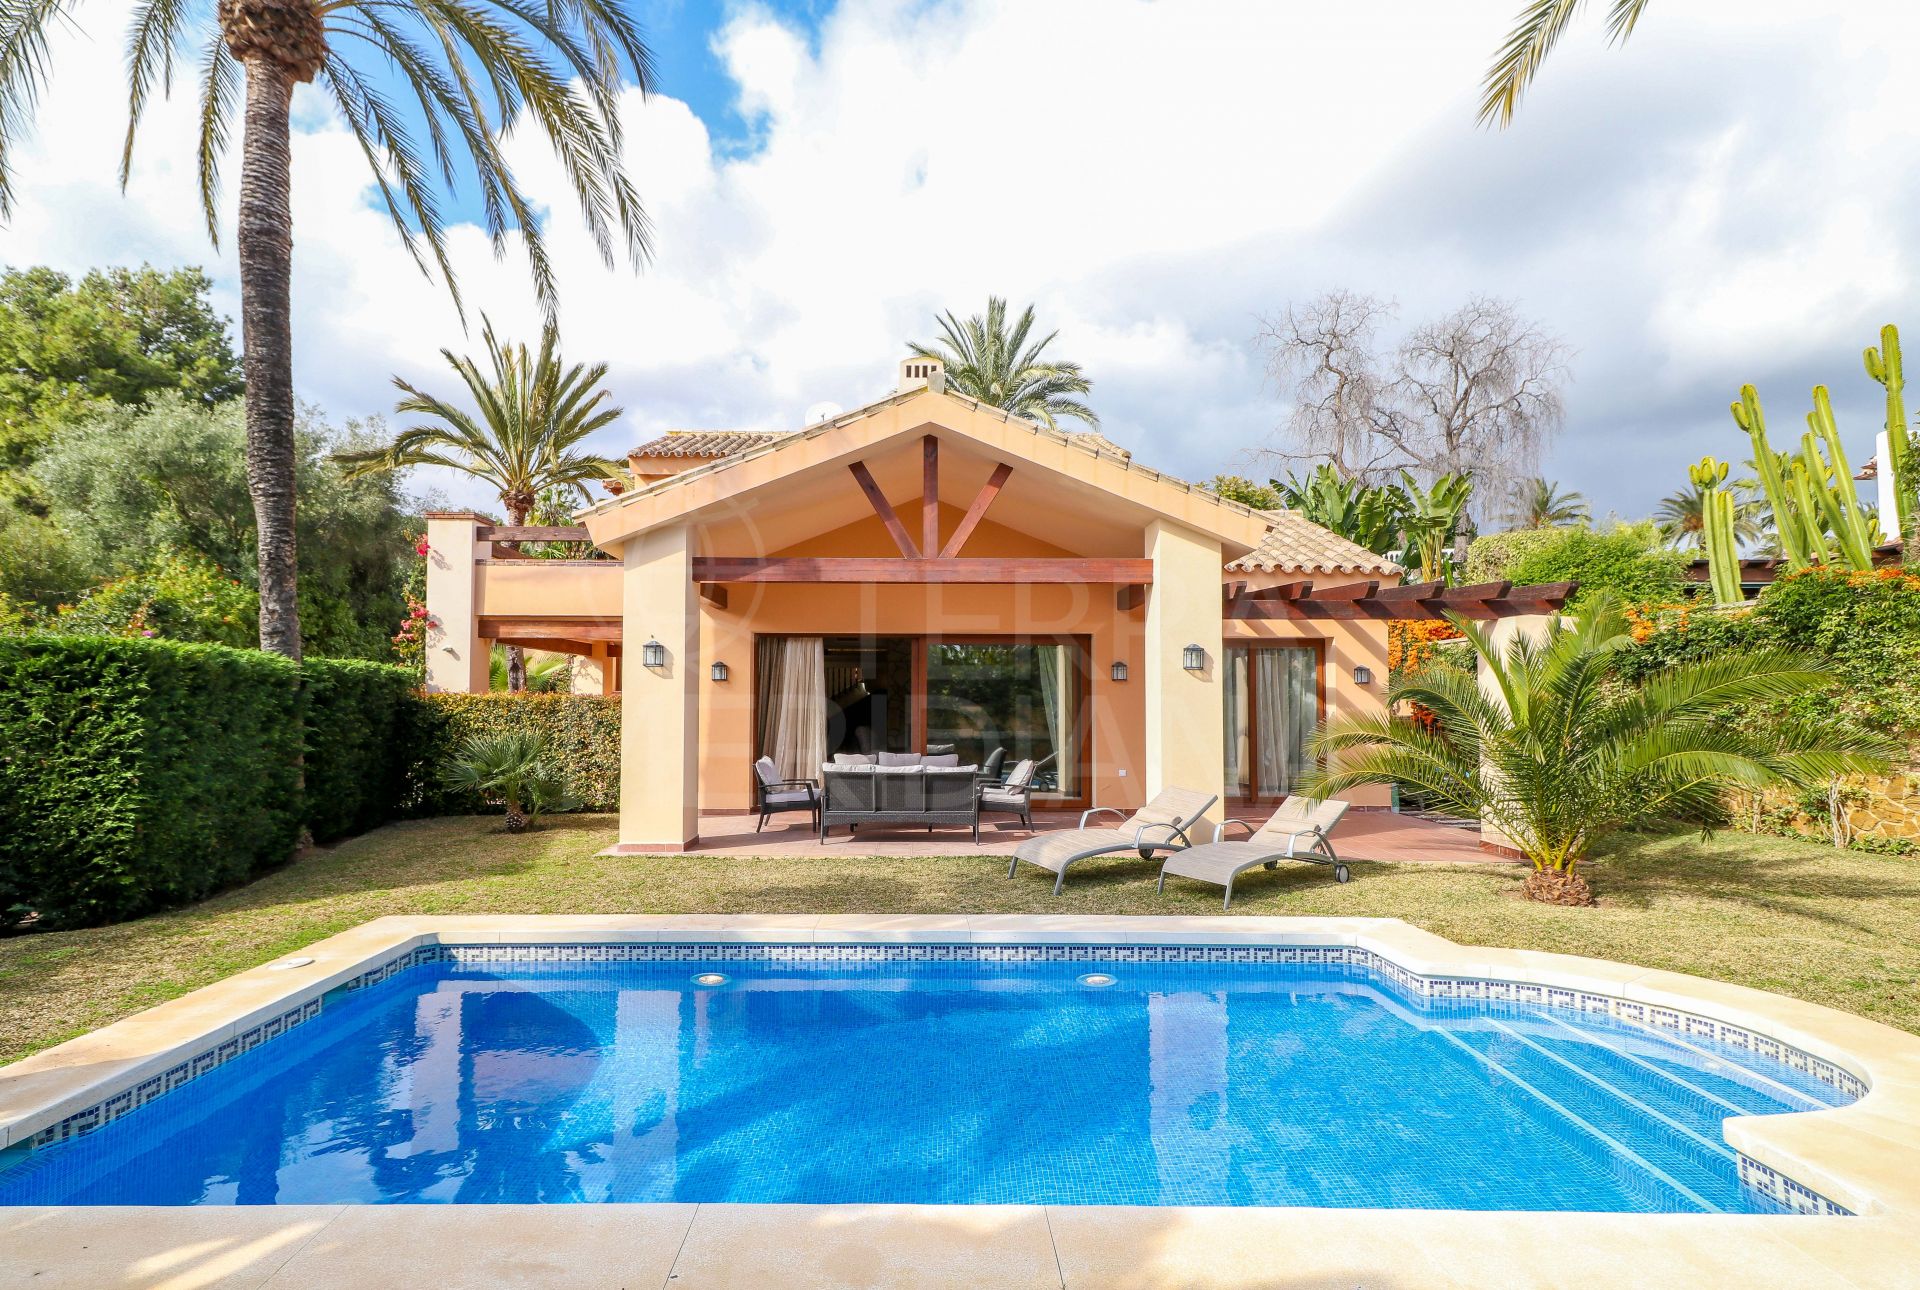 Spanish style villa with home cinema and sauna for sale near the beach in Marbesa, Marbella East